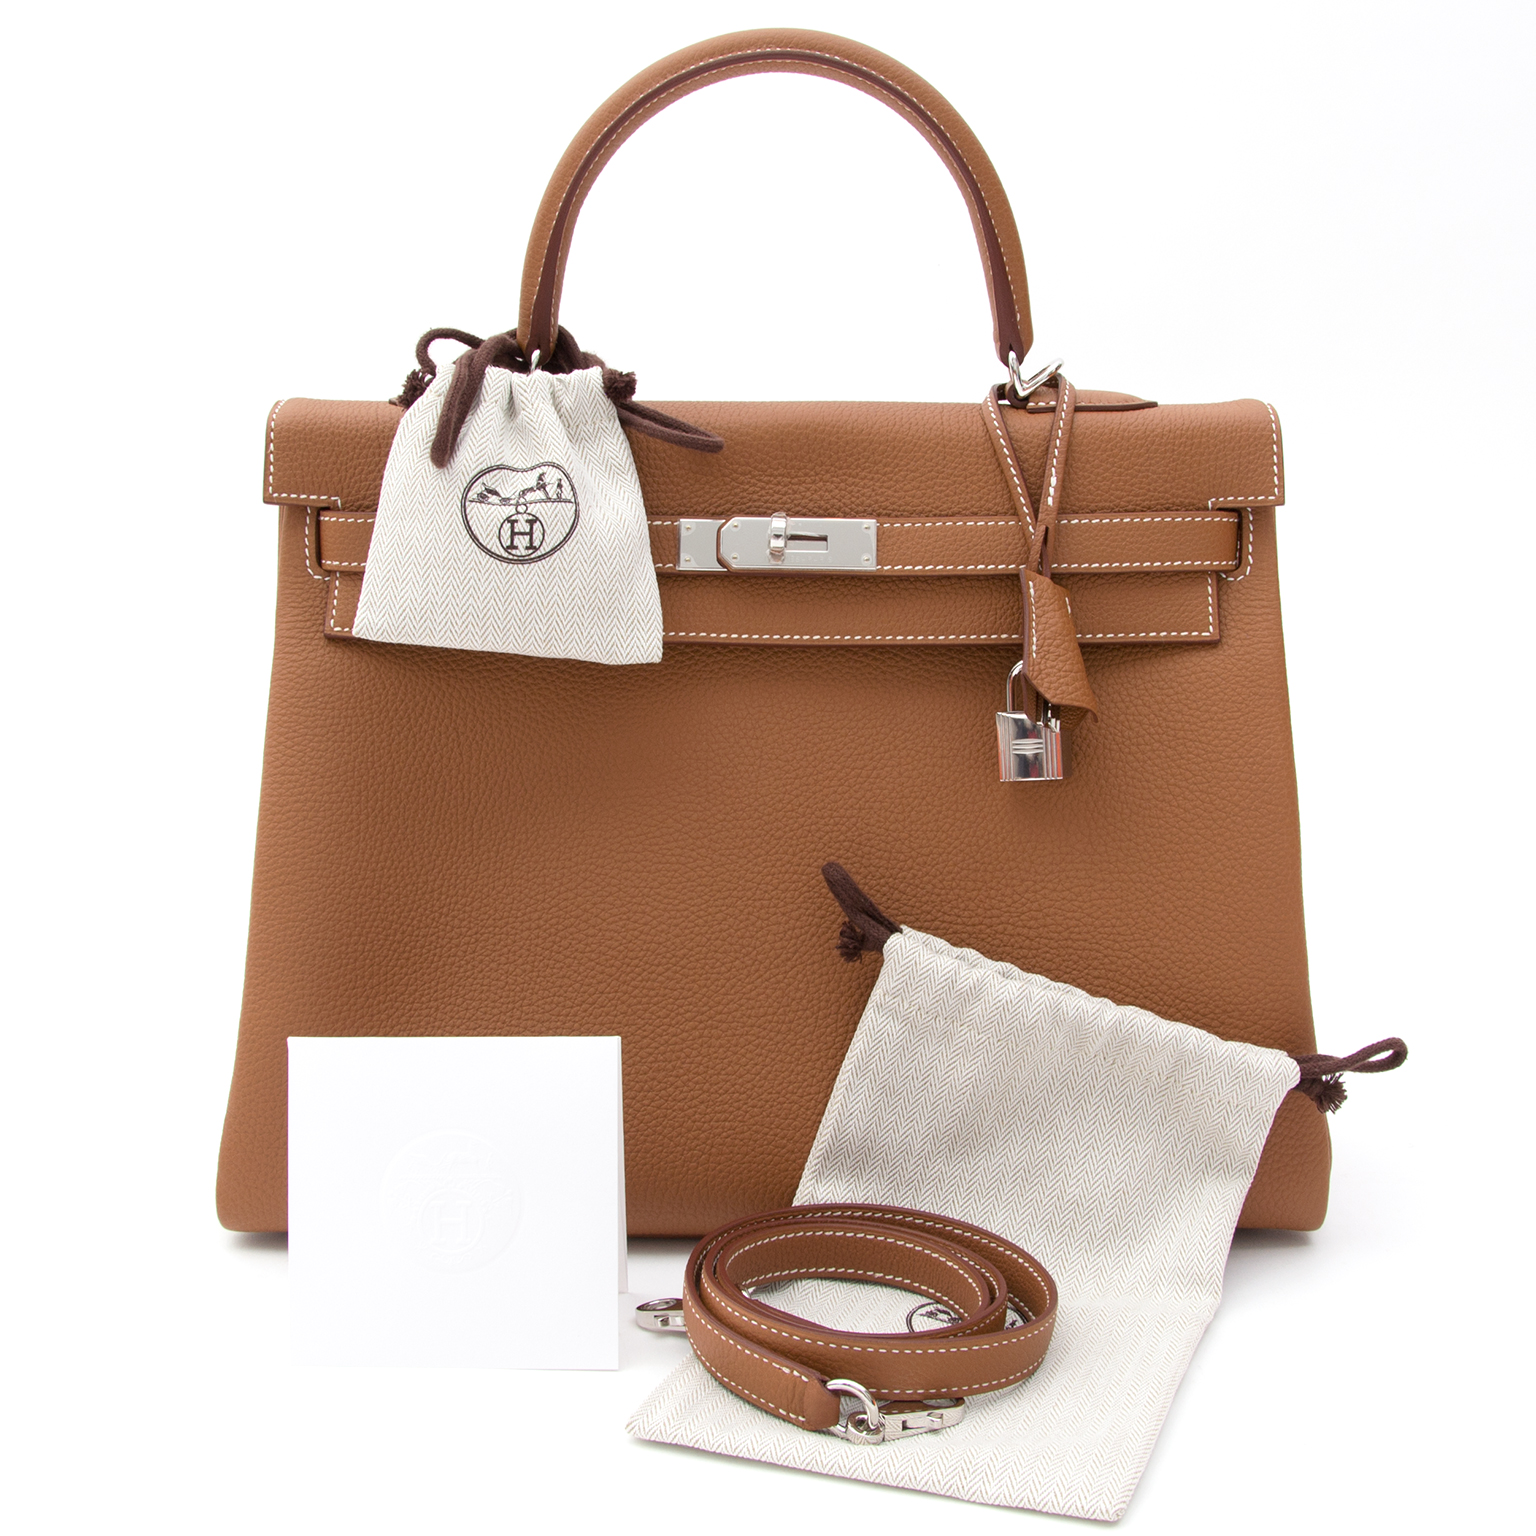 where to buy hermes handbags - Buy online with Labellov: authentic vintage second hand Hermes ...